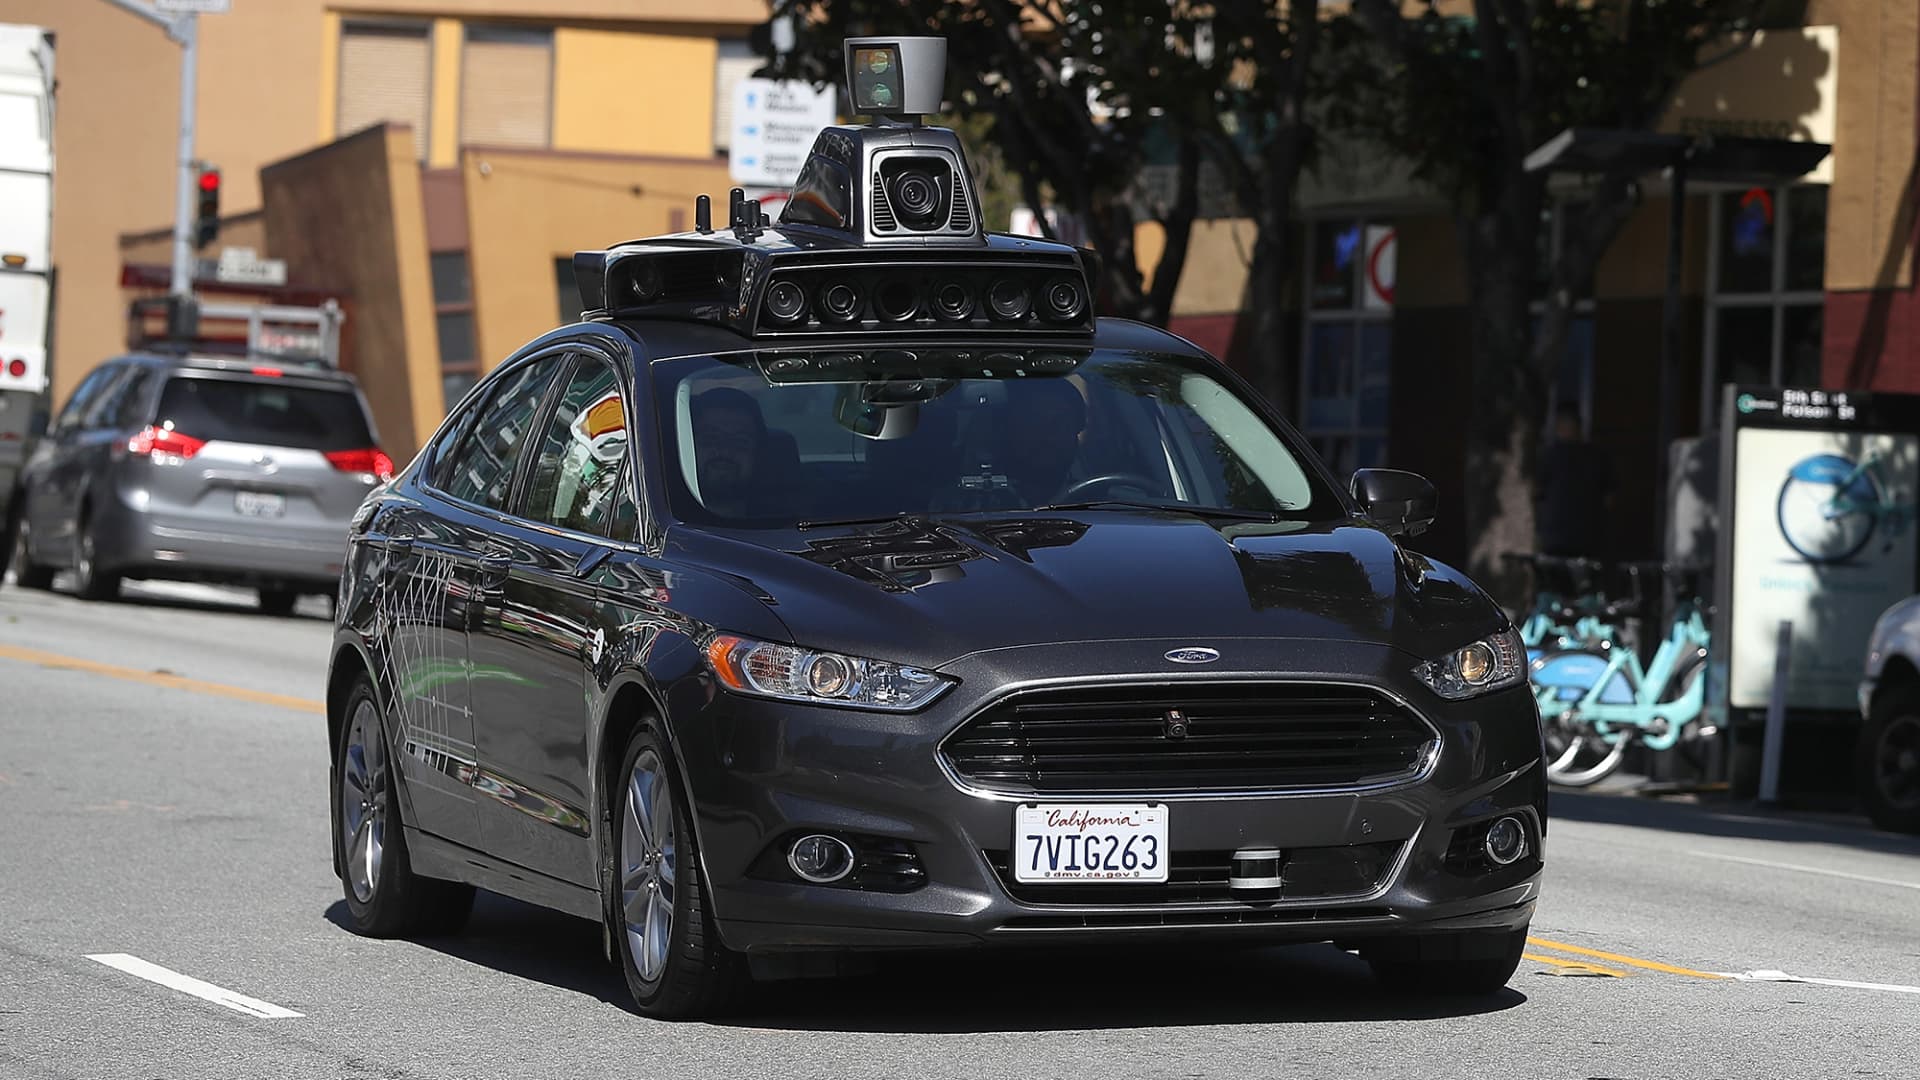 Bank of America names the tech stocks set to benefit from a driverless car boom